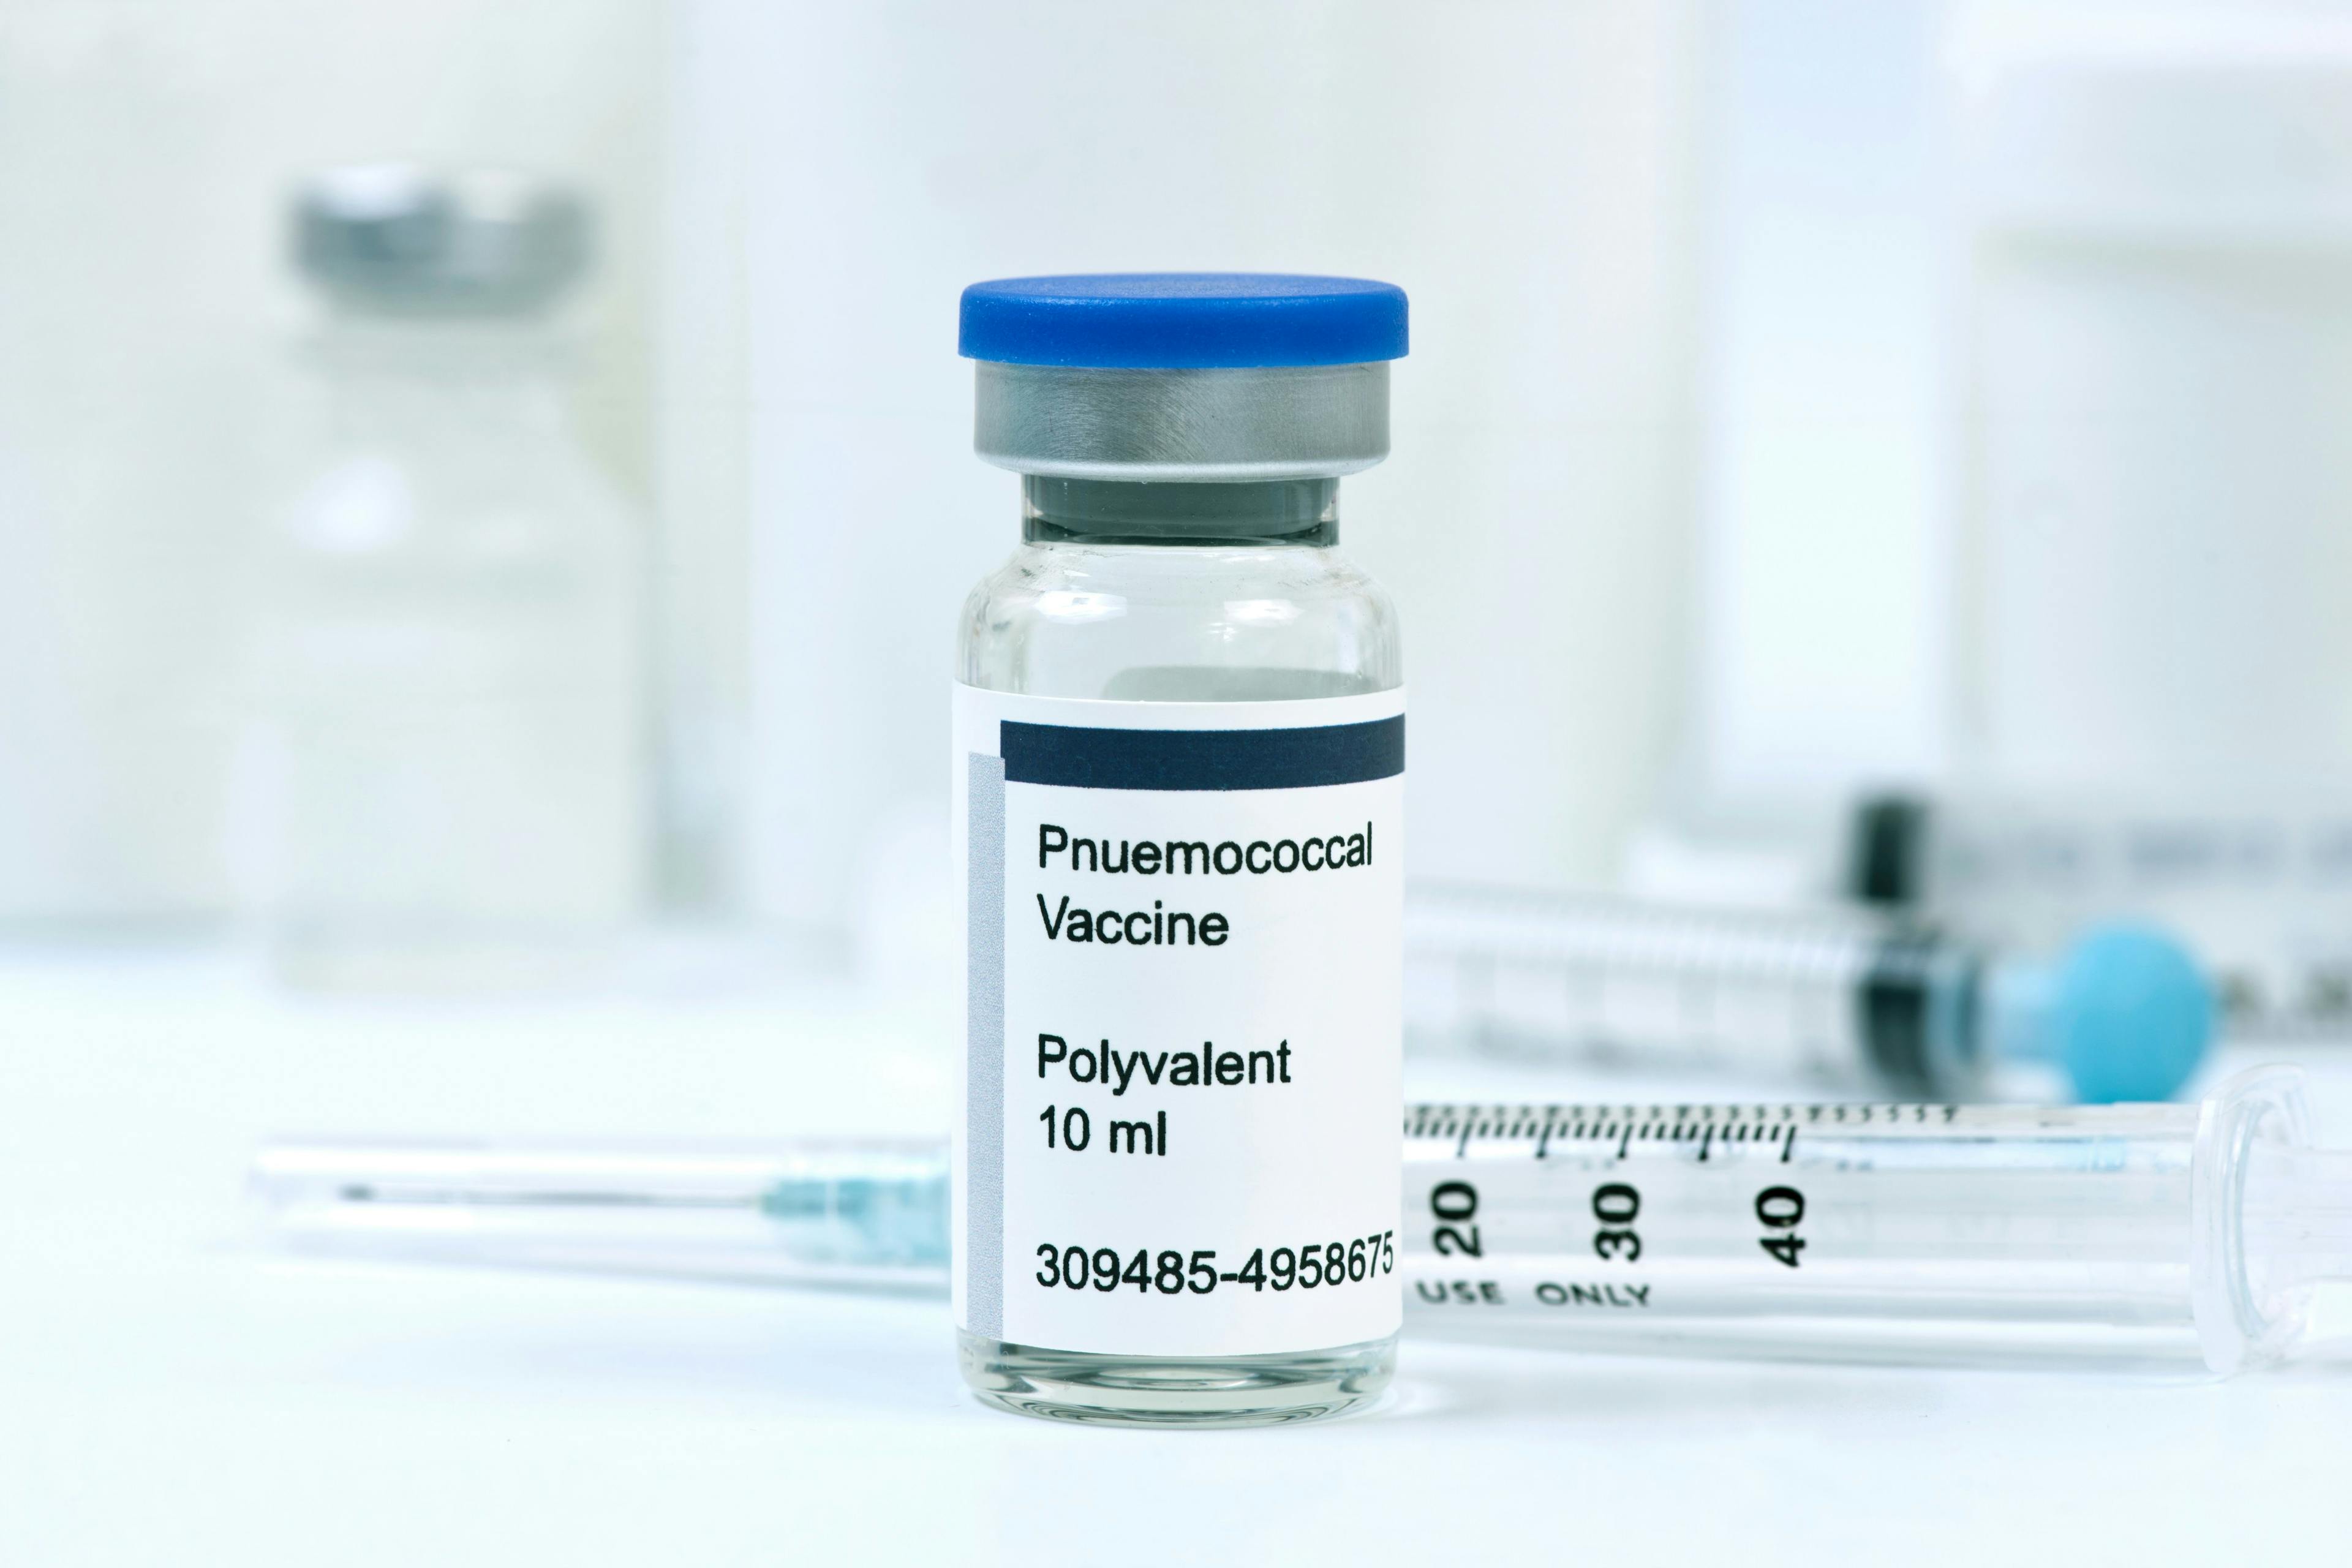 Pneumococcal Vaccine - Image credit: Sherry Young | stock.adobe.com